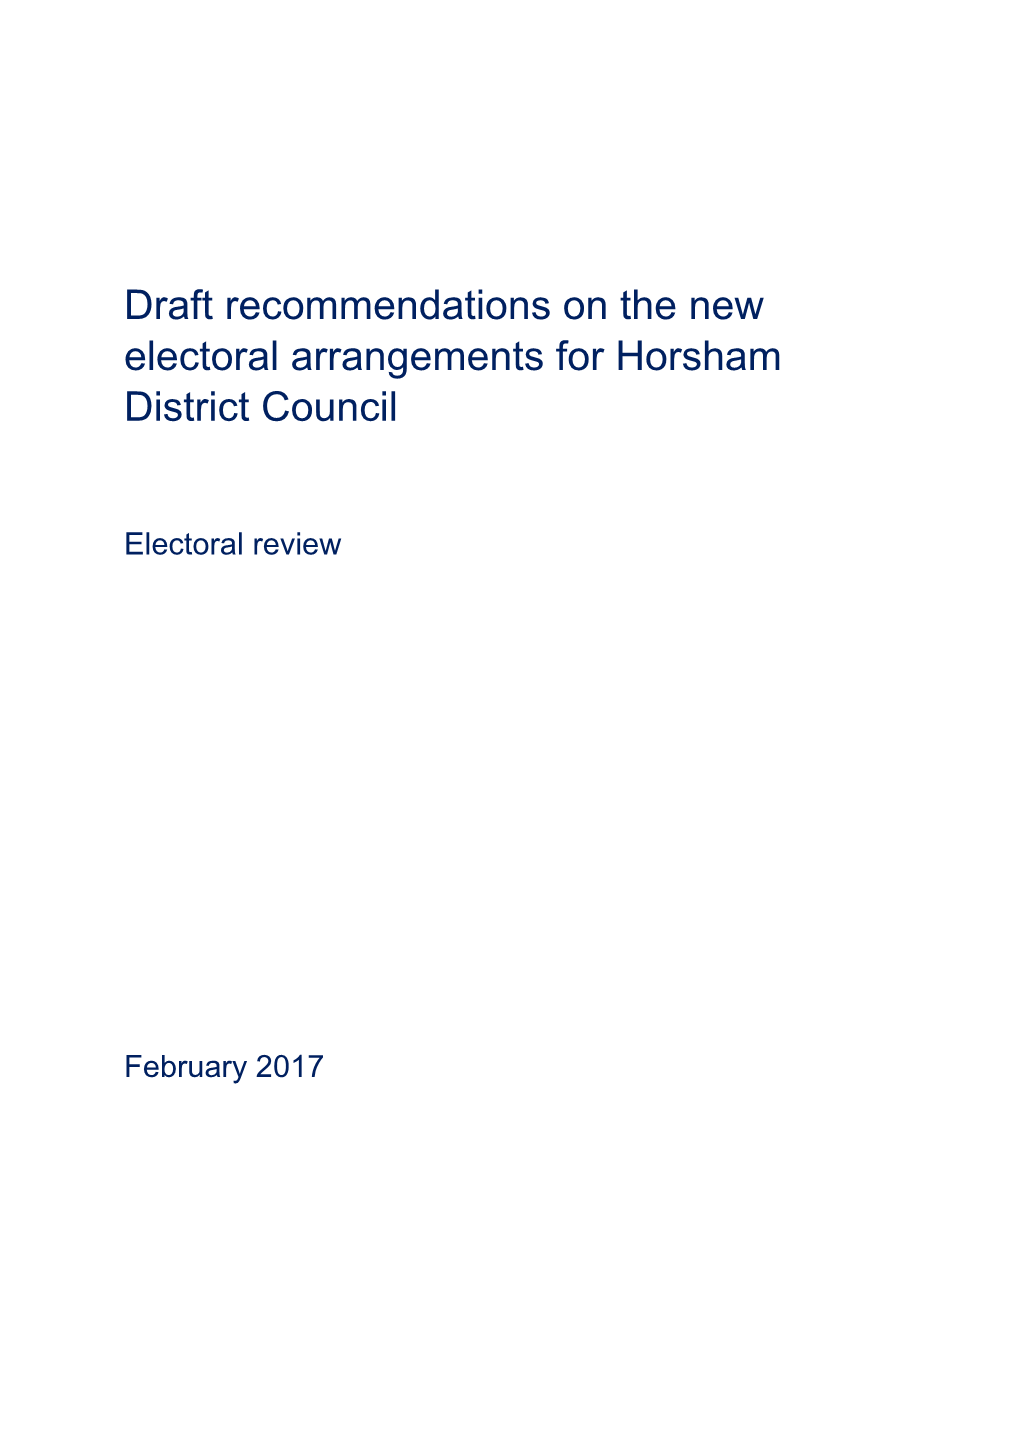 Response to Consultation on Horsham District Council's Electoral Boundary Re